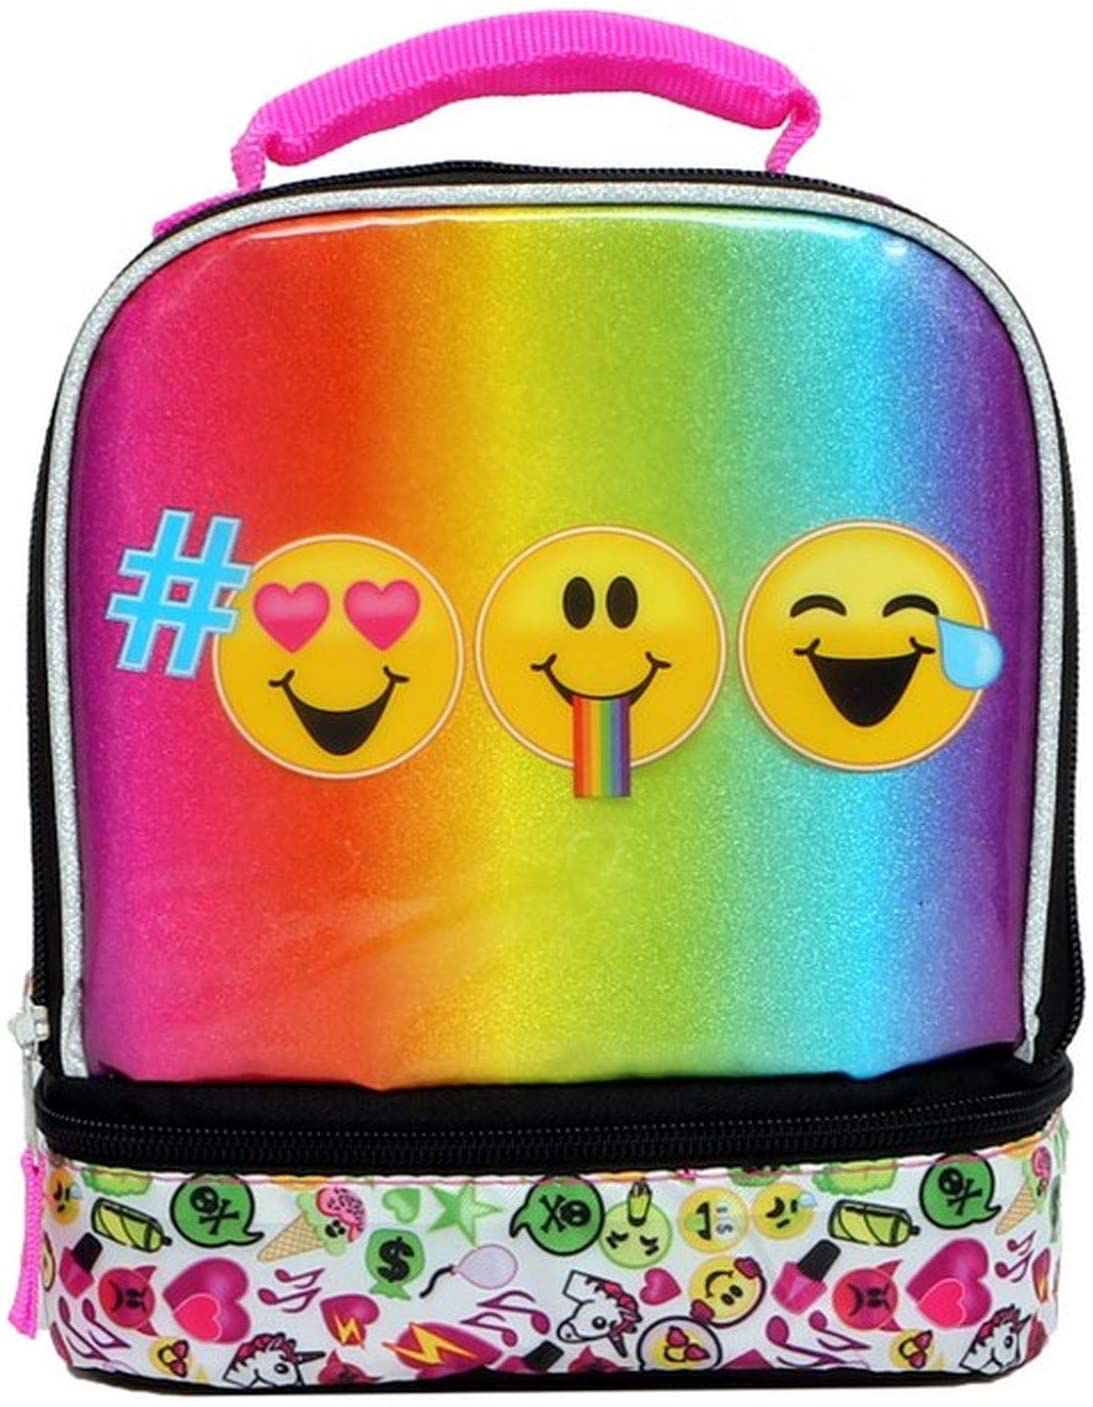 Emojination, Multicolor Emoji Lead Safe chambers insulated Lunch Tote Bag Box, 8 inches by 9 inches